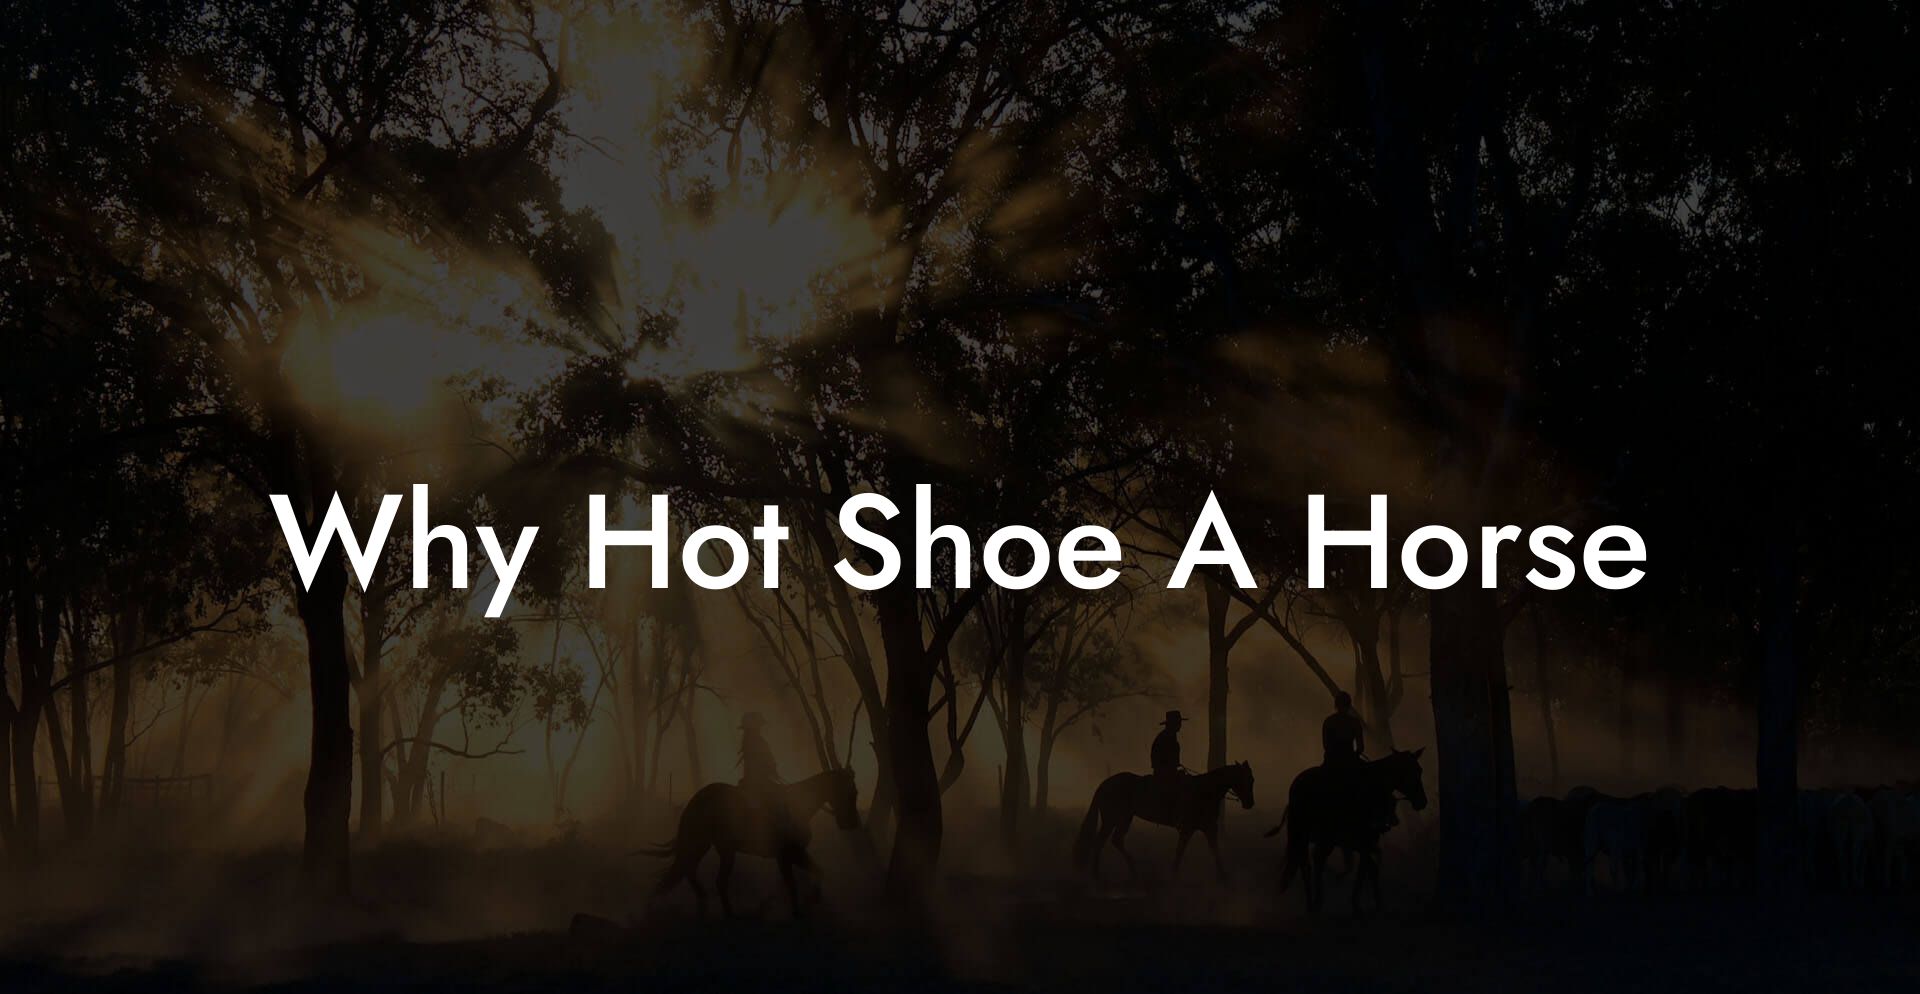 Why Hot Shoe A Horse